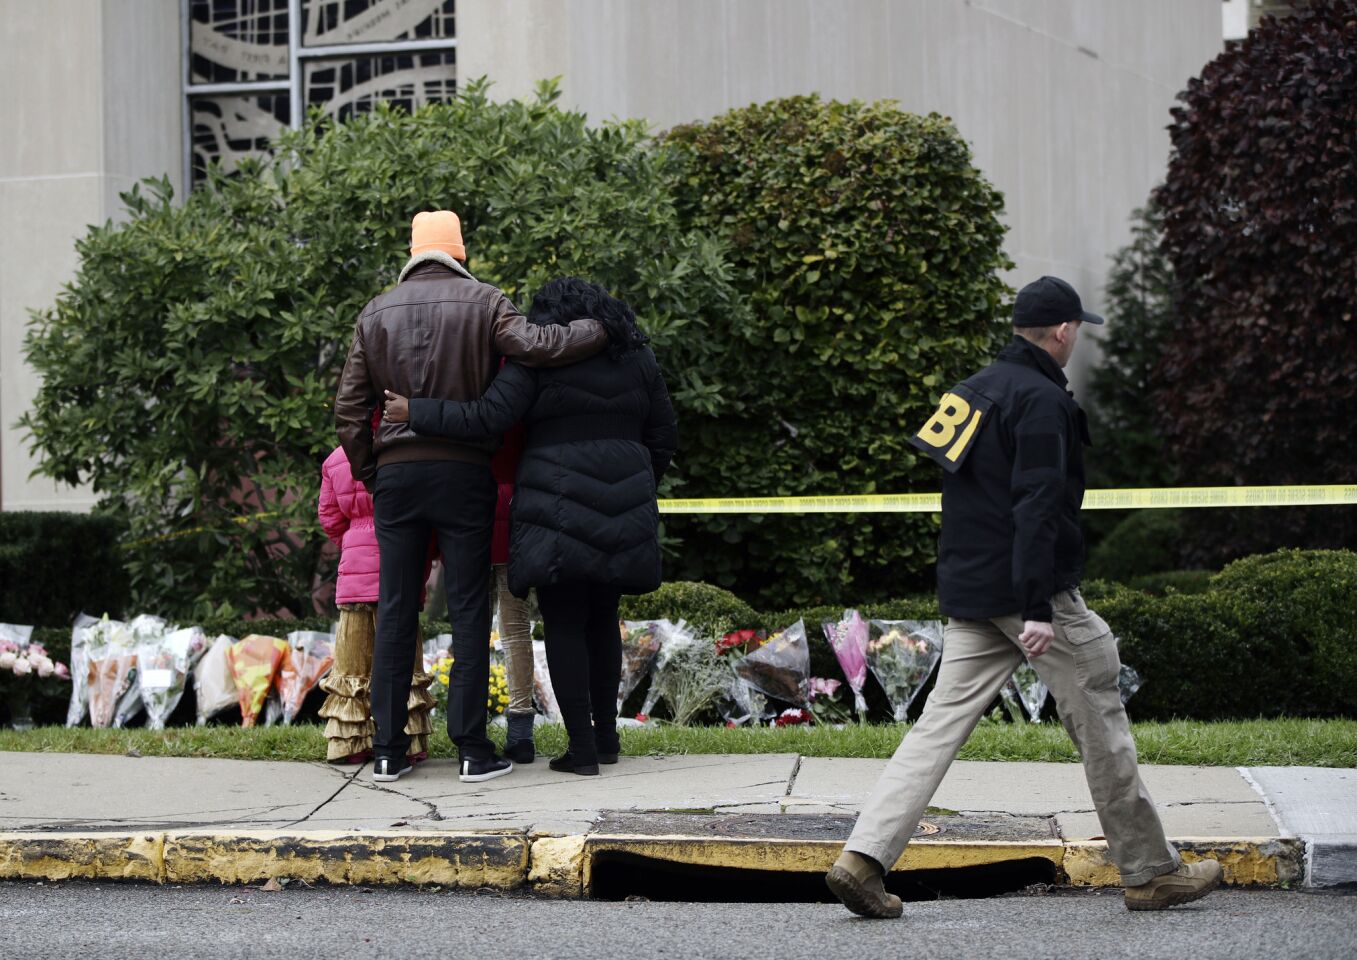 People pay their respects at a memorial outside the Tree of Life synagogue in Pittsburgh on Oct. 28, 2018.